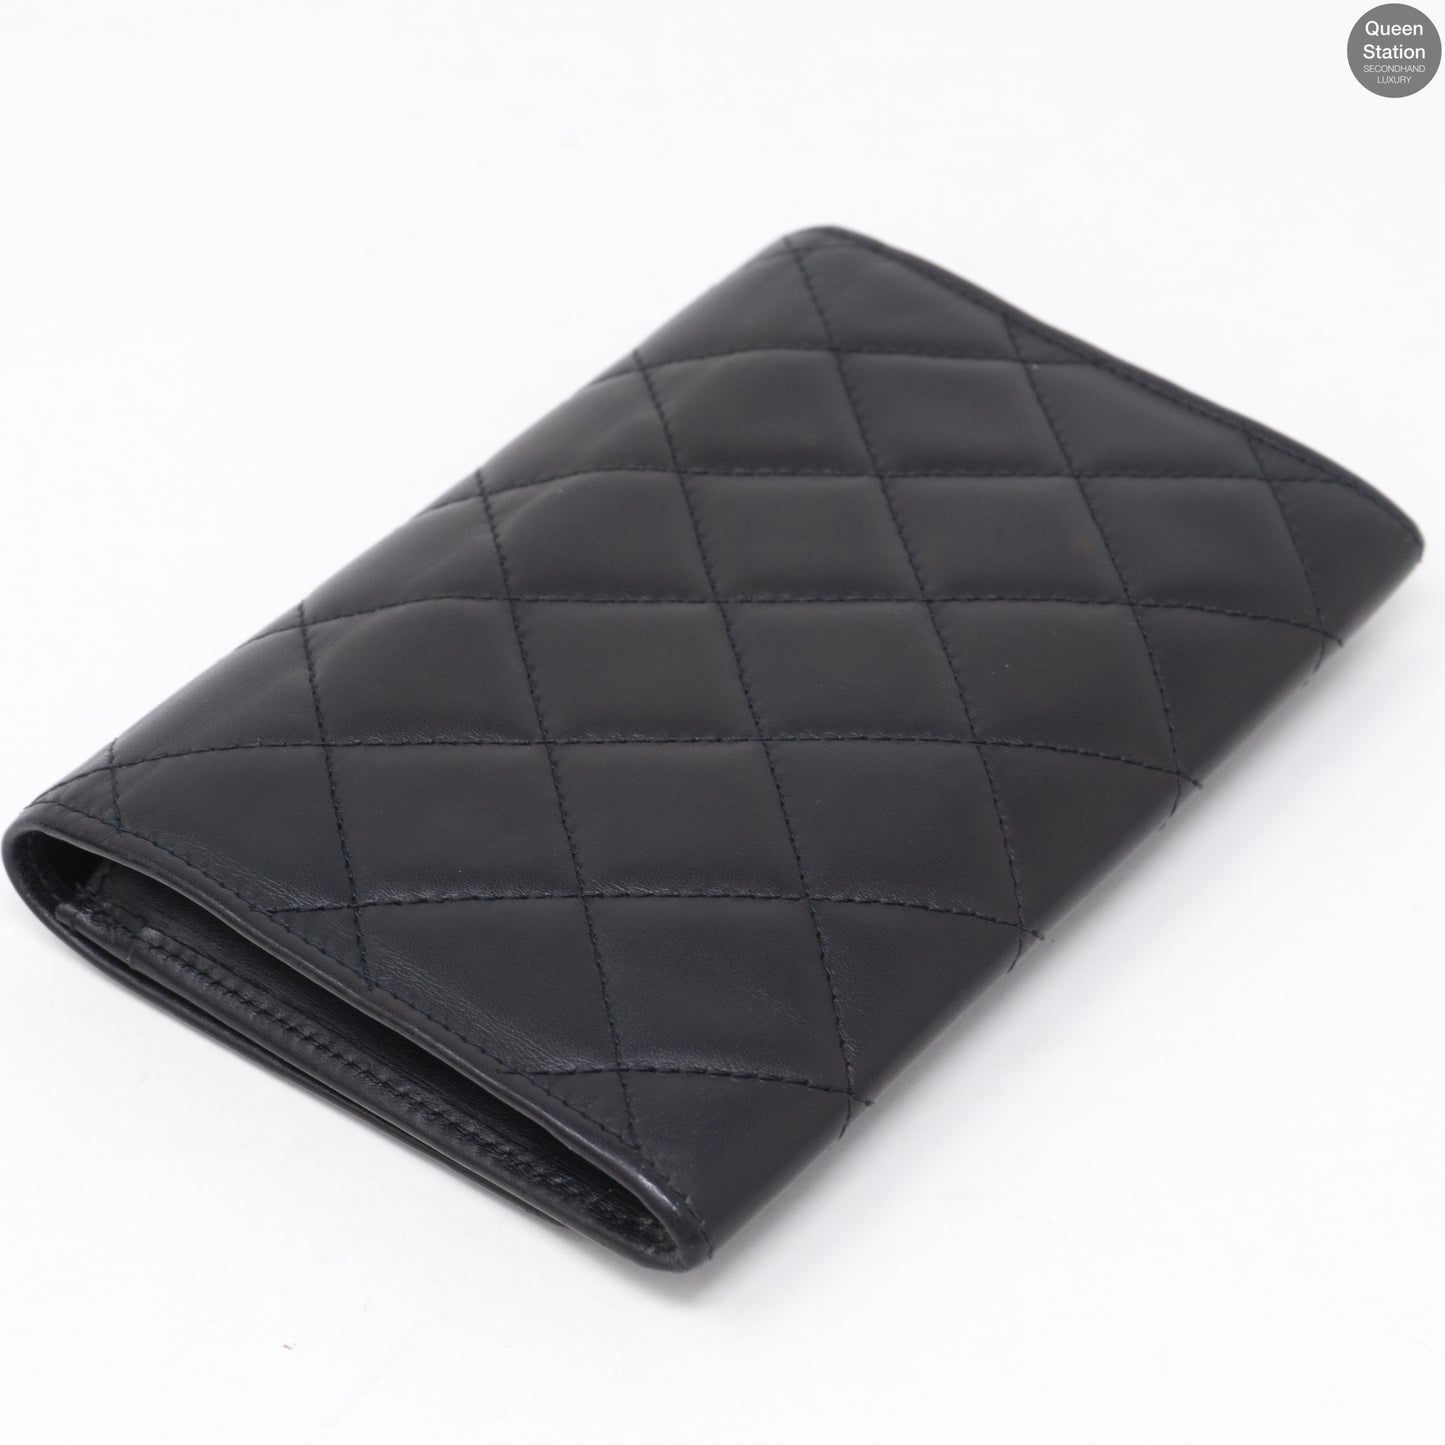 Cambon Leather Wallet